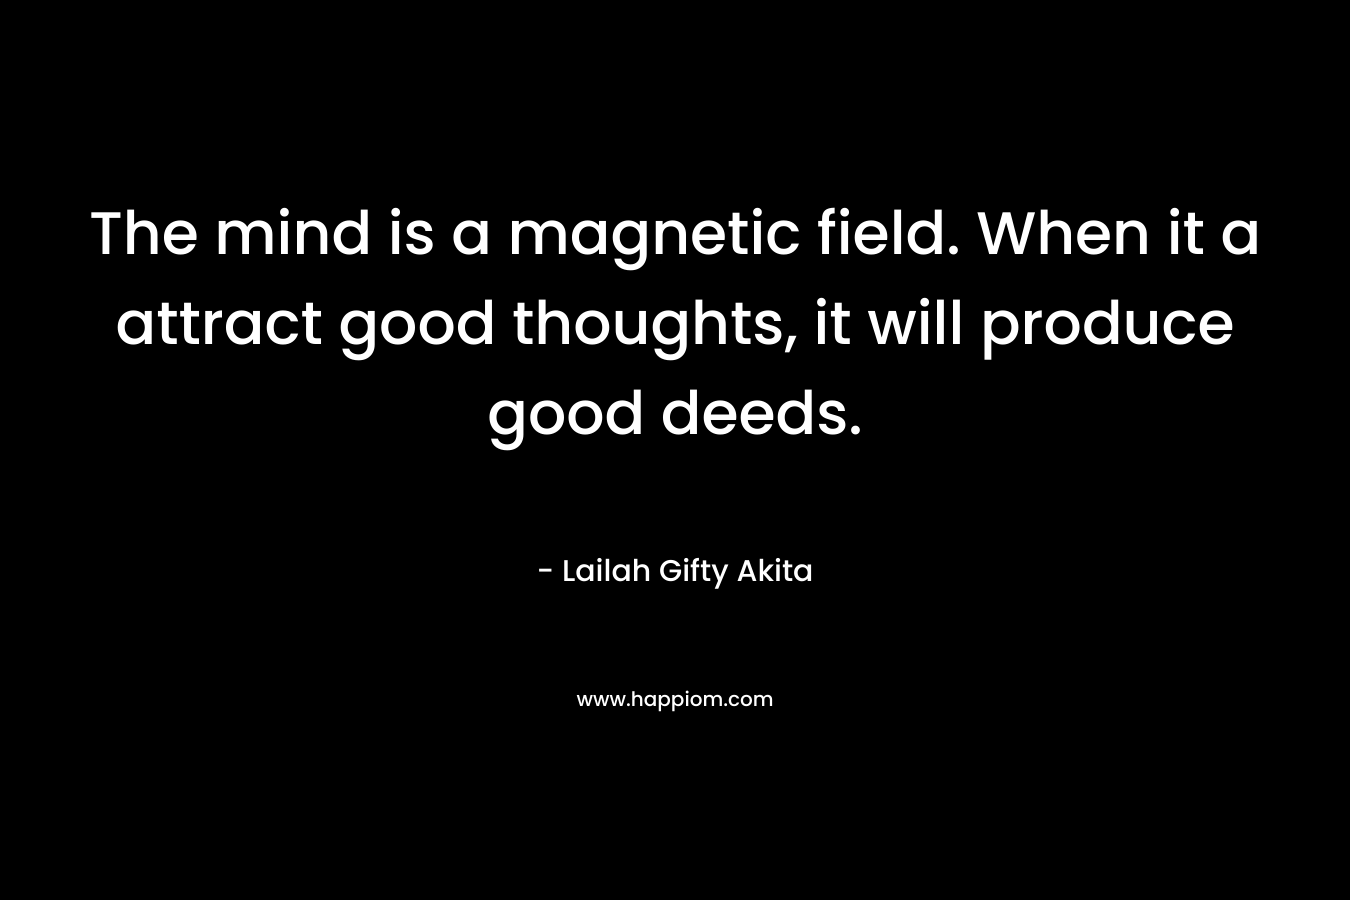 The mind is a magnetic field. When it a attract good thoughts, it will produce good deeds.